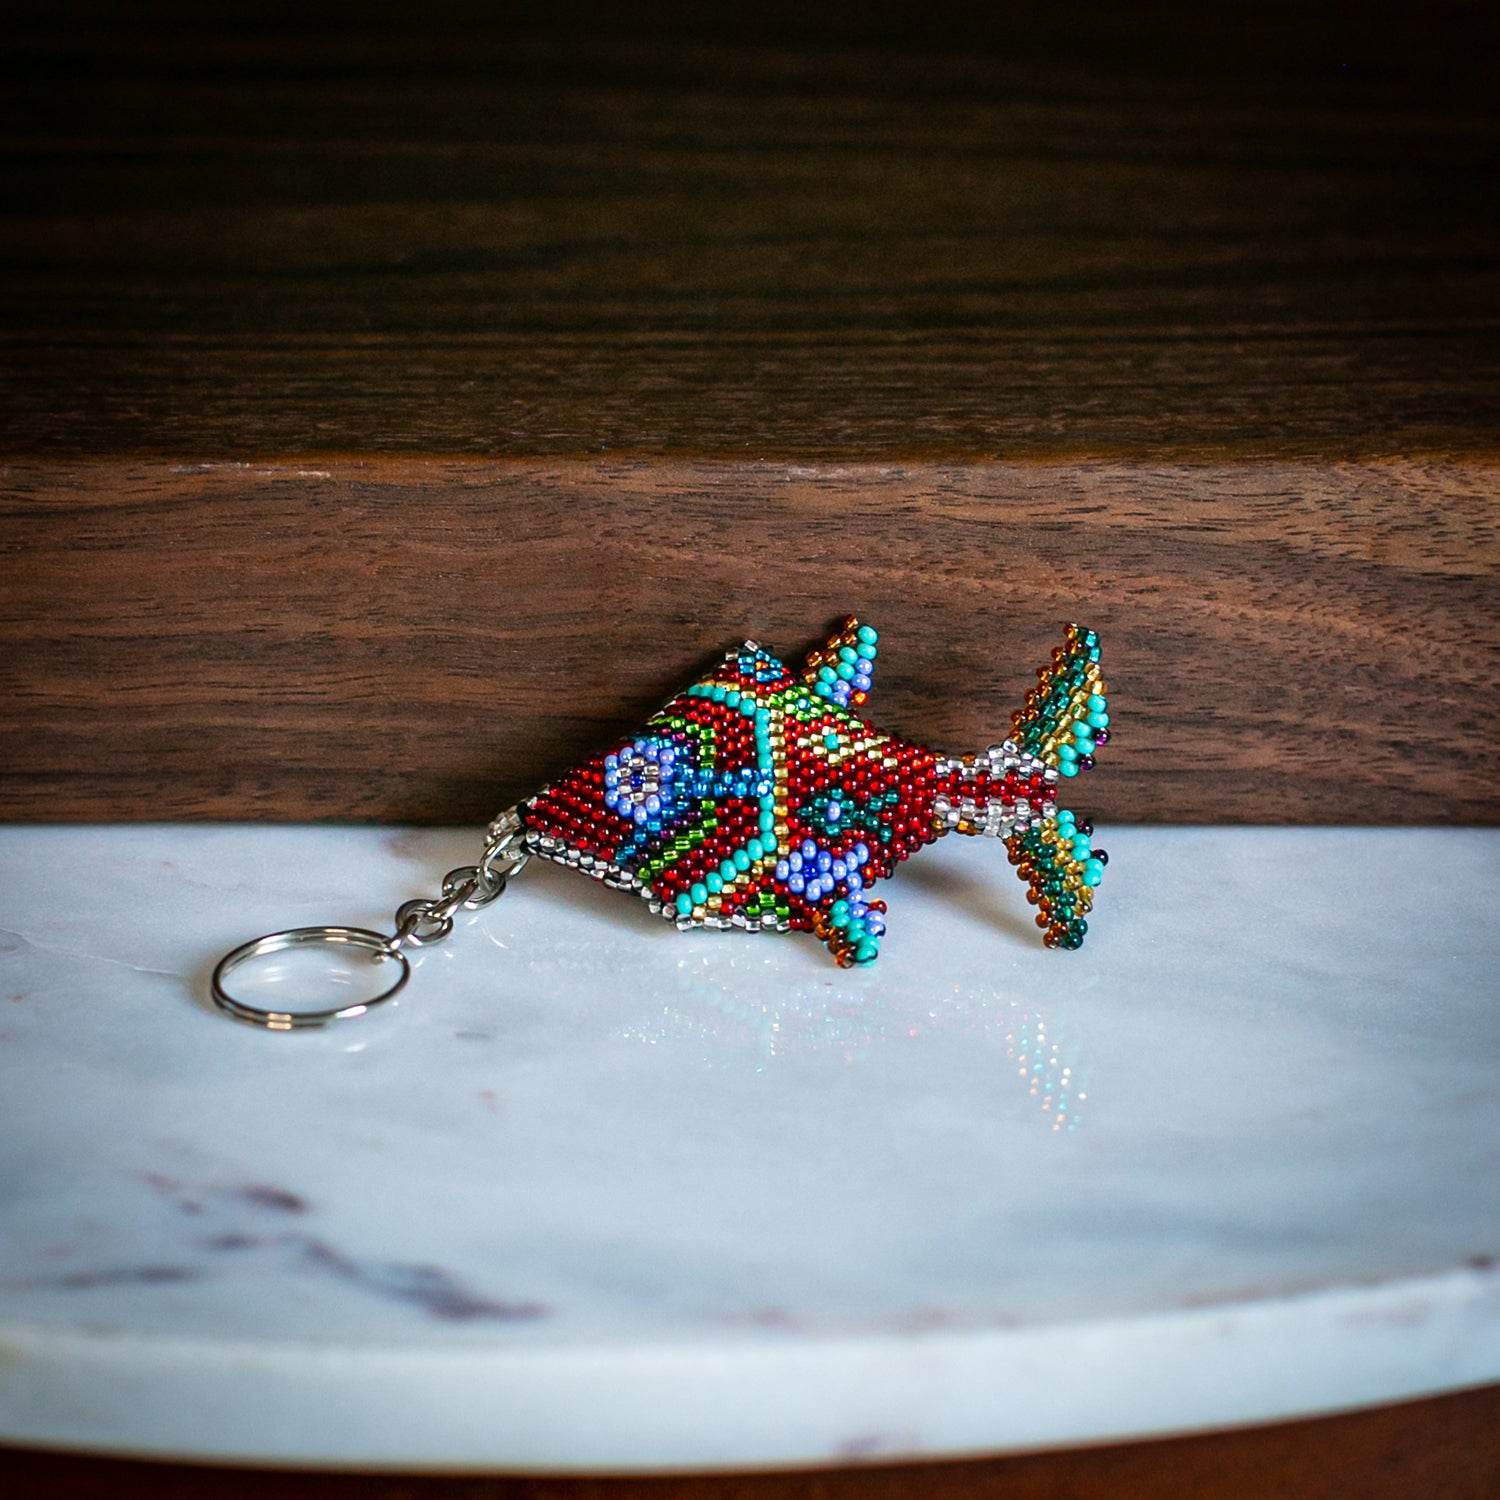 Lucia's Imports Hand-Beaded Fish Key Chain | Shop Fair Trade | Shop Lucia's at Lucia's World Emporium